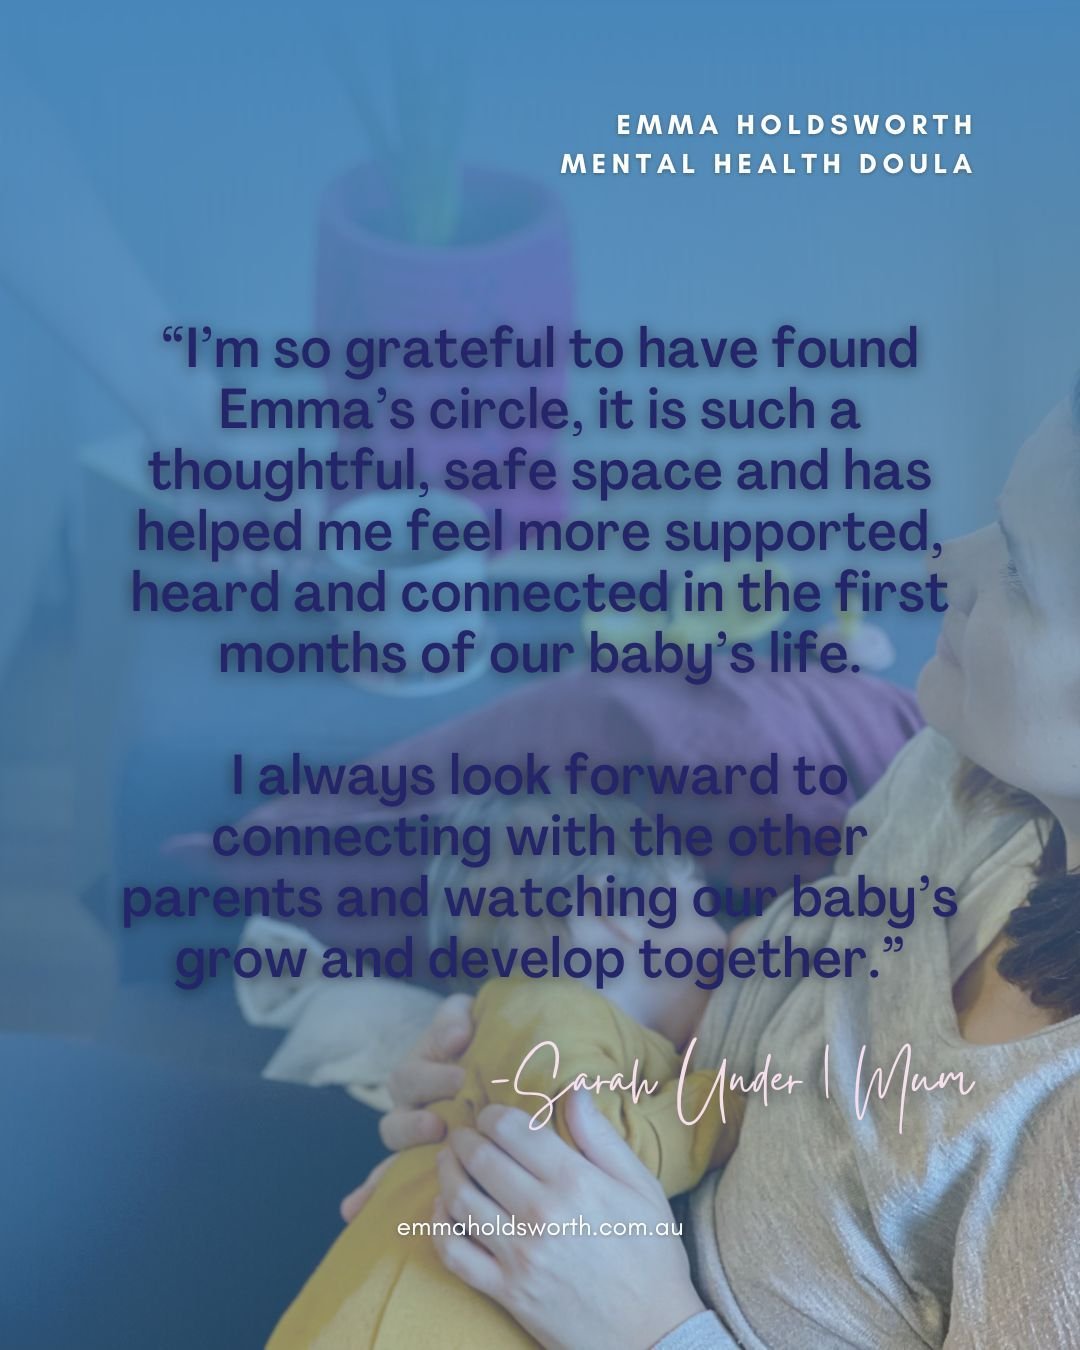 This is what it is like to be a part of the under 1 mums Circle.

All new mums deserve this sort of support and connection across their babies 1st year and beyond.

Join us from Thursday May 9th. We would love to have you.

Tag a mum or mum to be who